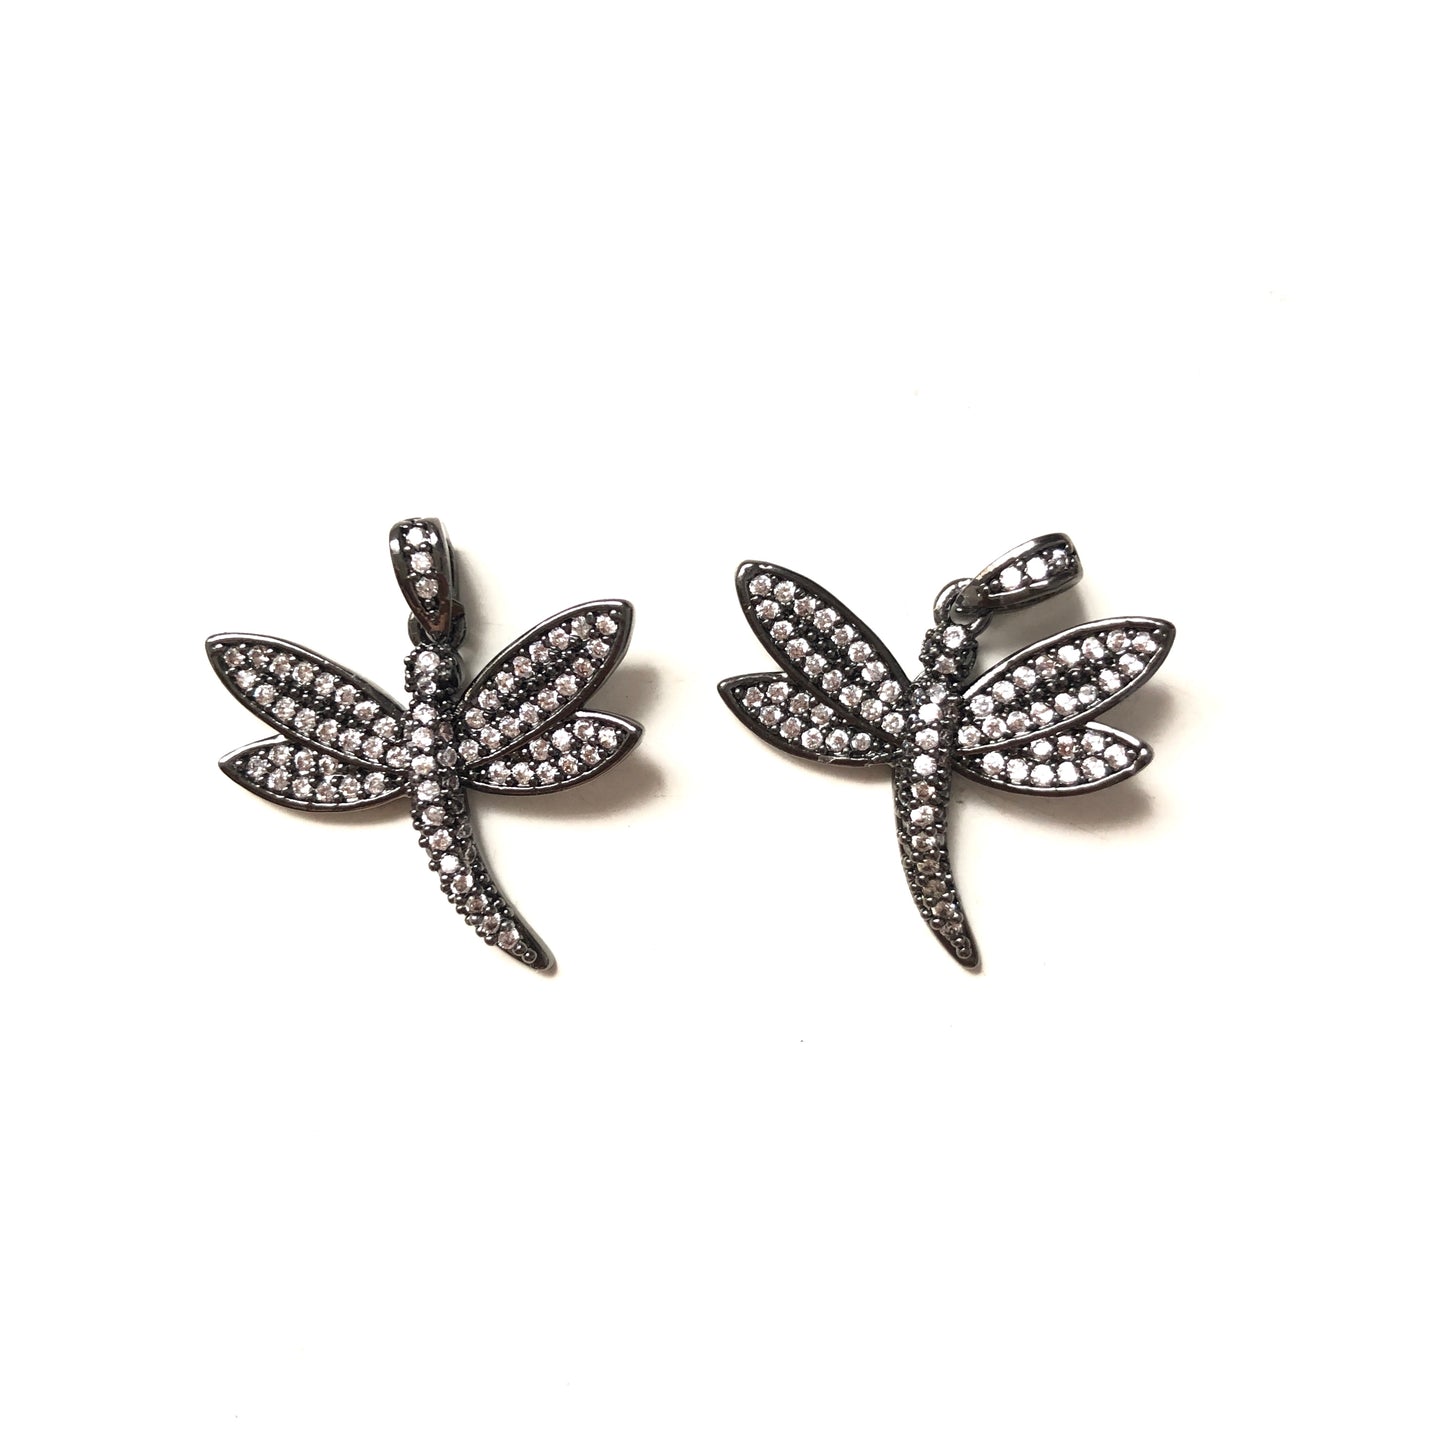 10pcs/lot 23.5*21.5mm CZ Paved Dragonfly Charms Black CZ Paved Charms Animals & Insects Charms Beads Beyond